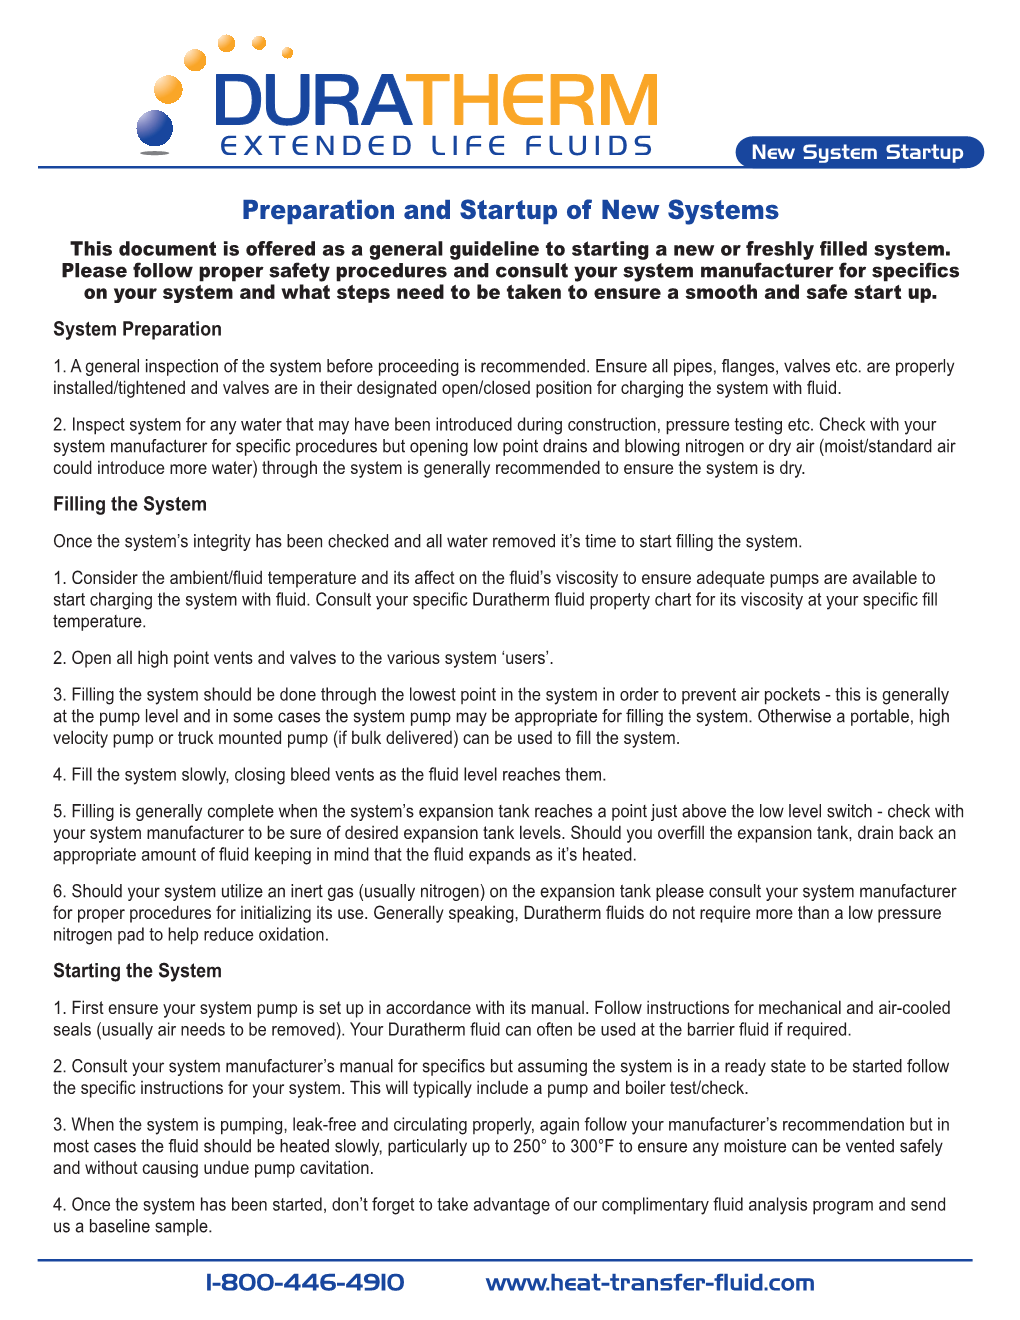 Preparation and Startup of New Systems This Document Is Offered As a General Guideline to Starting a New Or Freshly Filled System